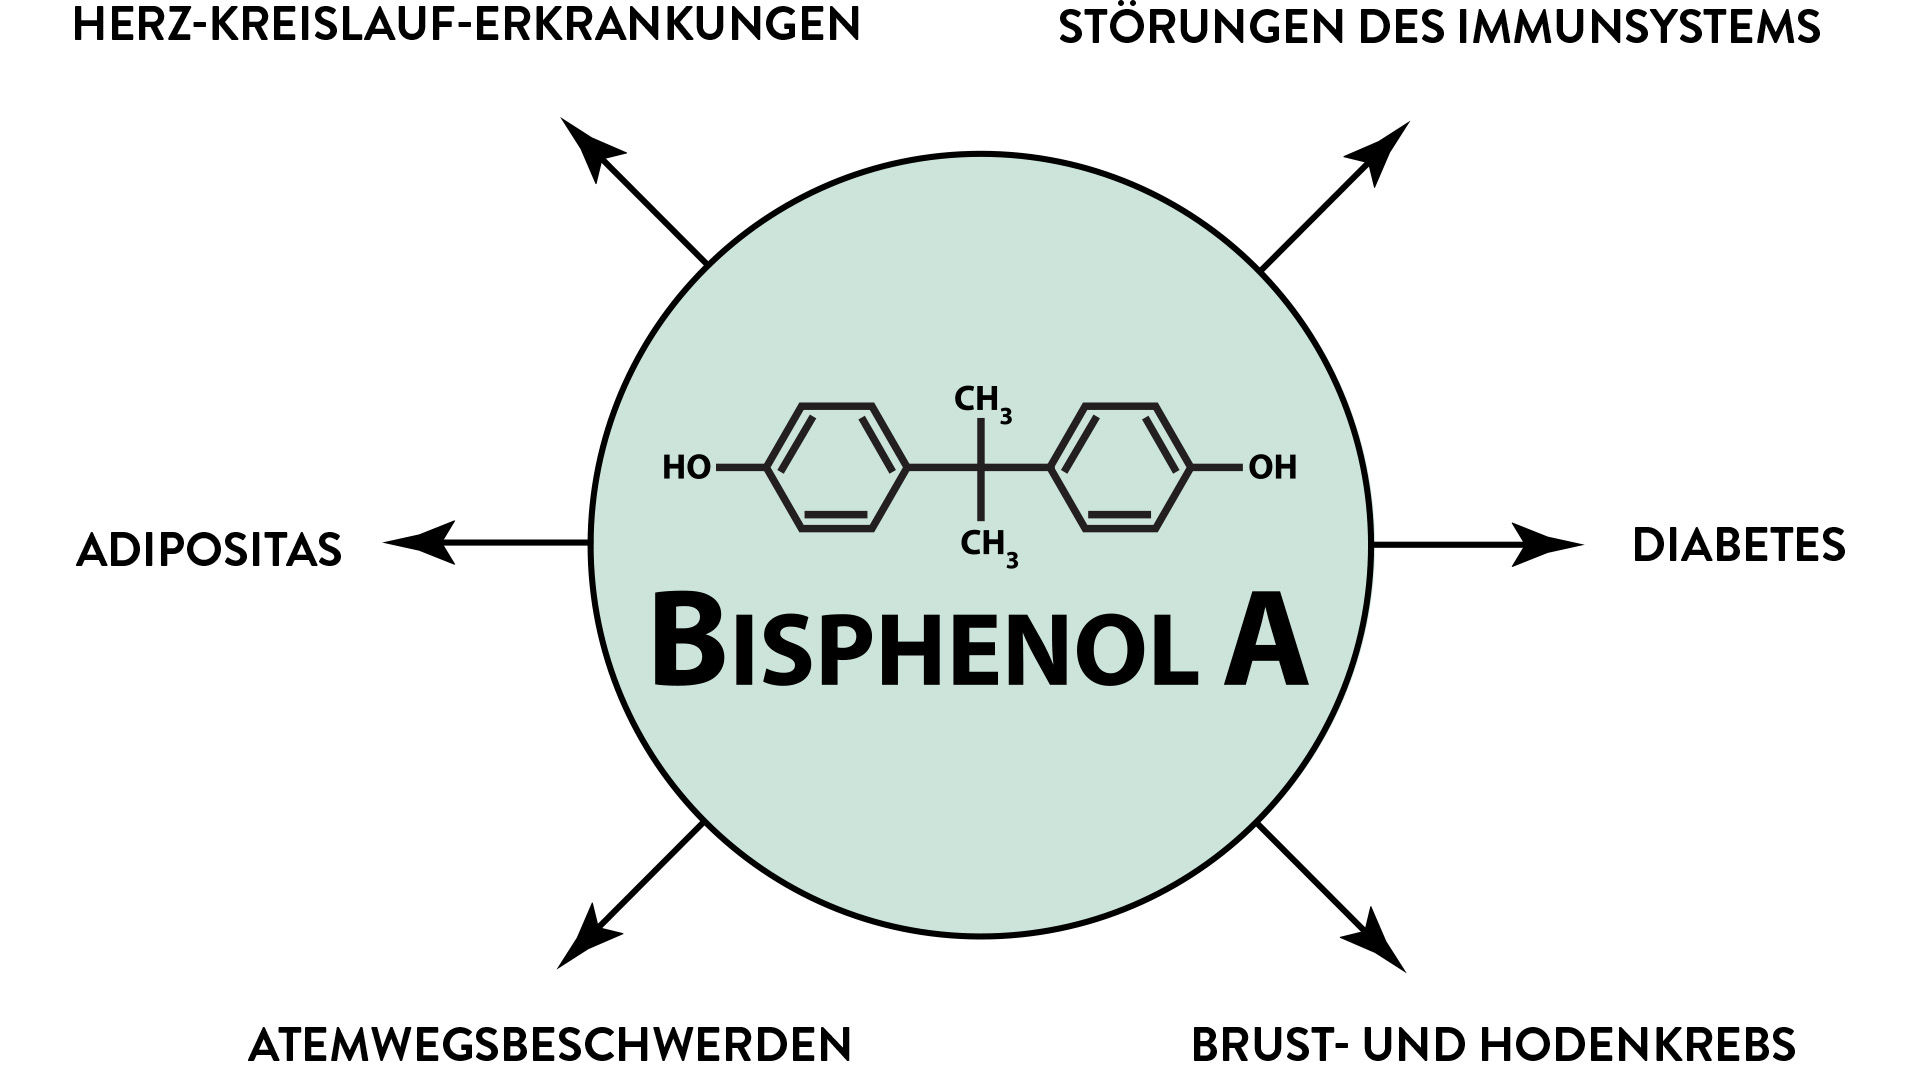 Chemical formula of bisphenol A and associated illnesses